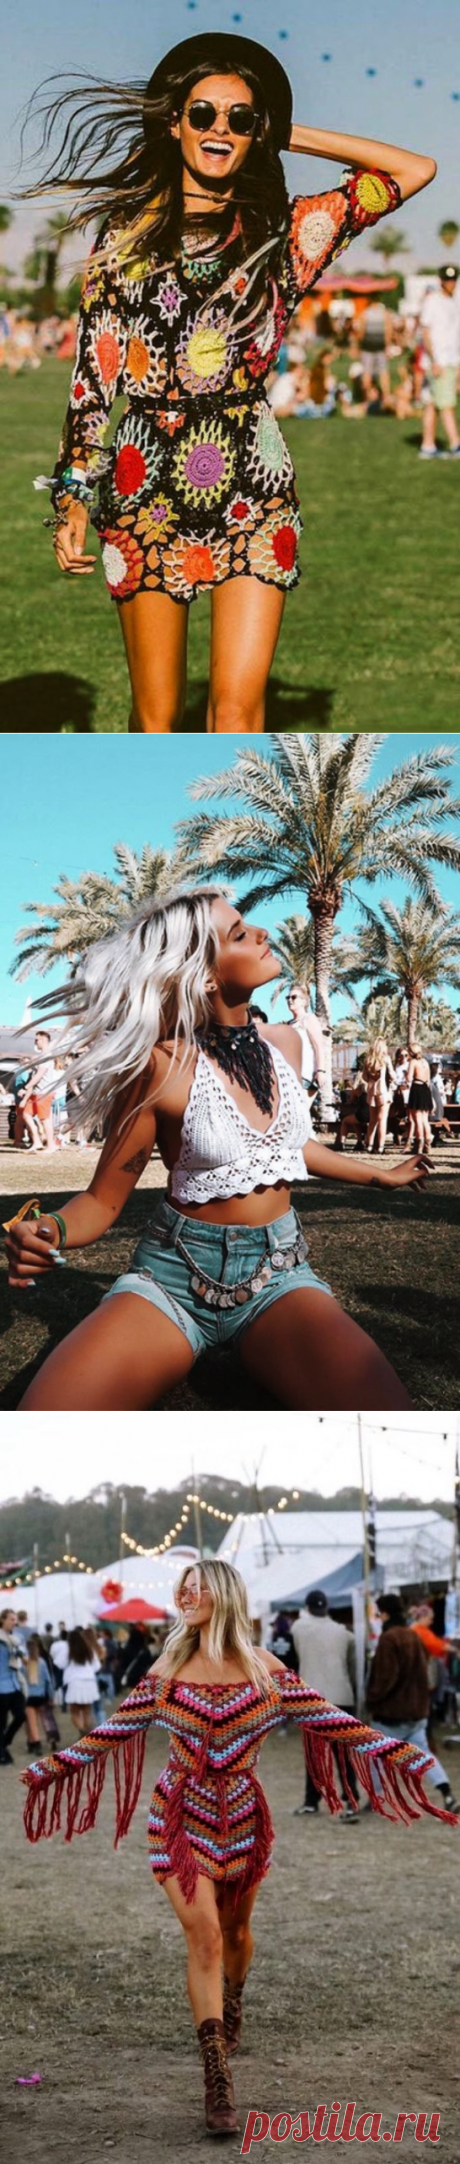 45 Trending Coachella Outfits Ideas to Steal Right Now - Fashiondioxide